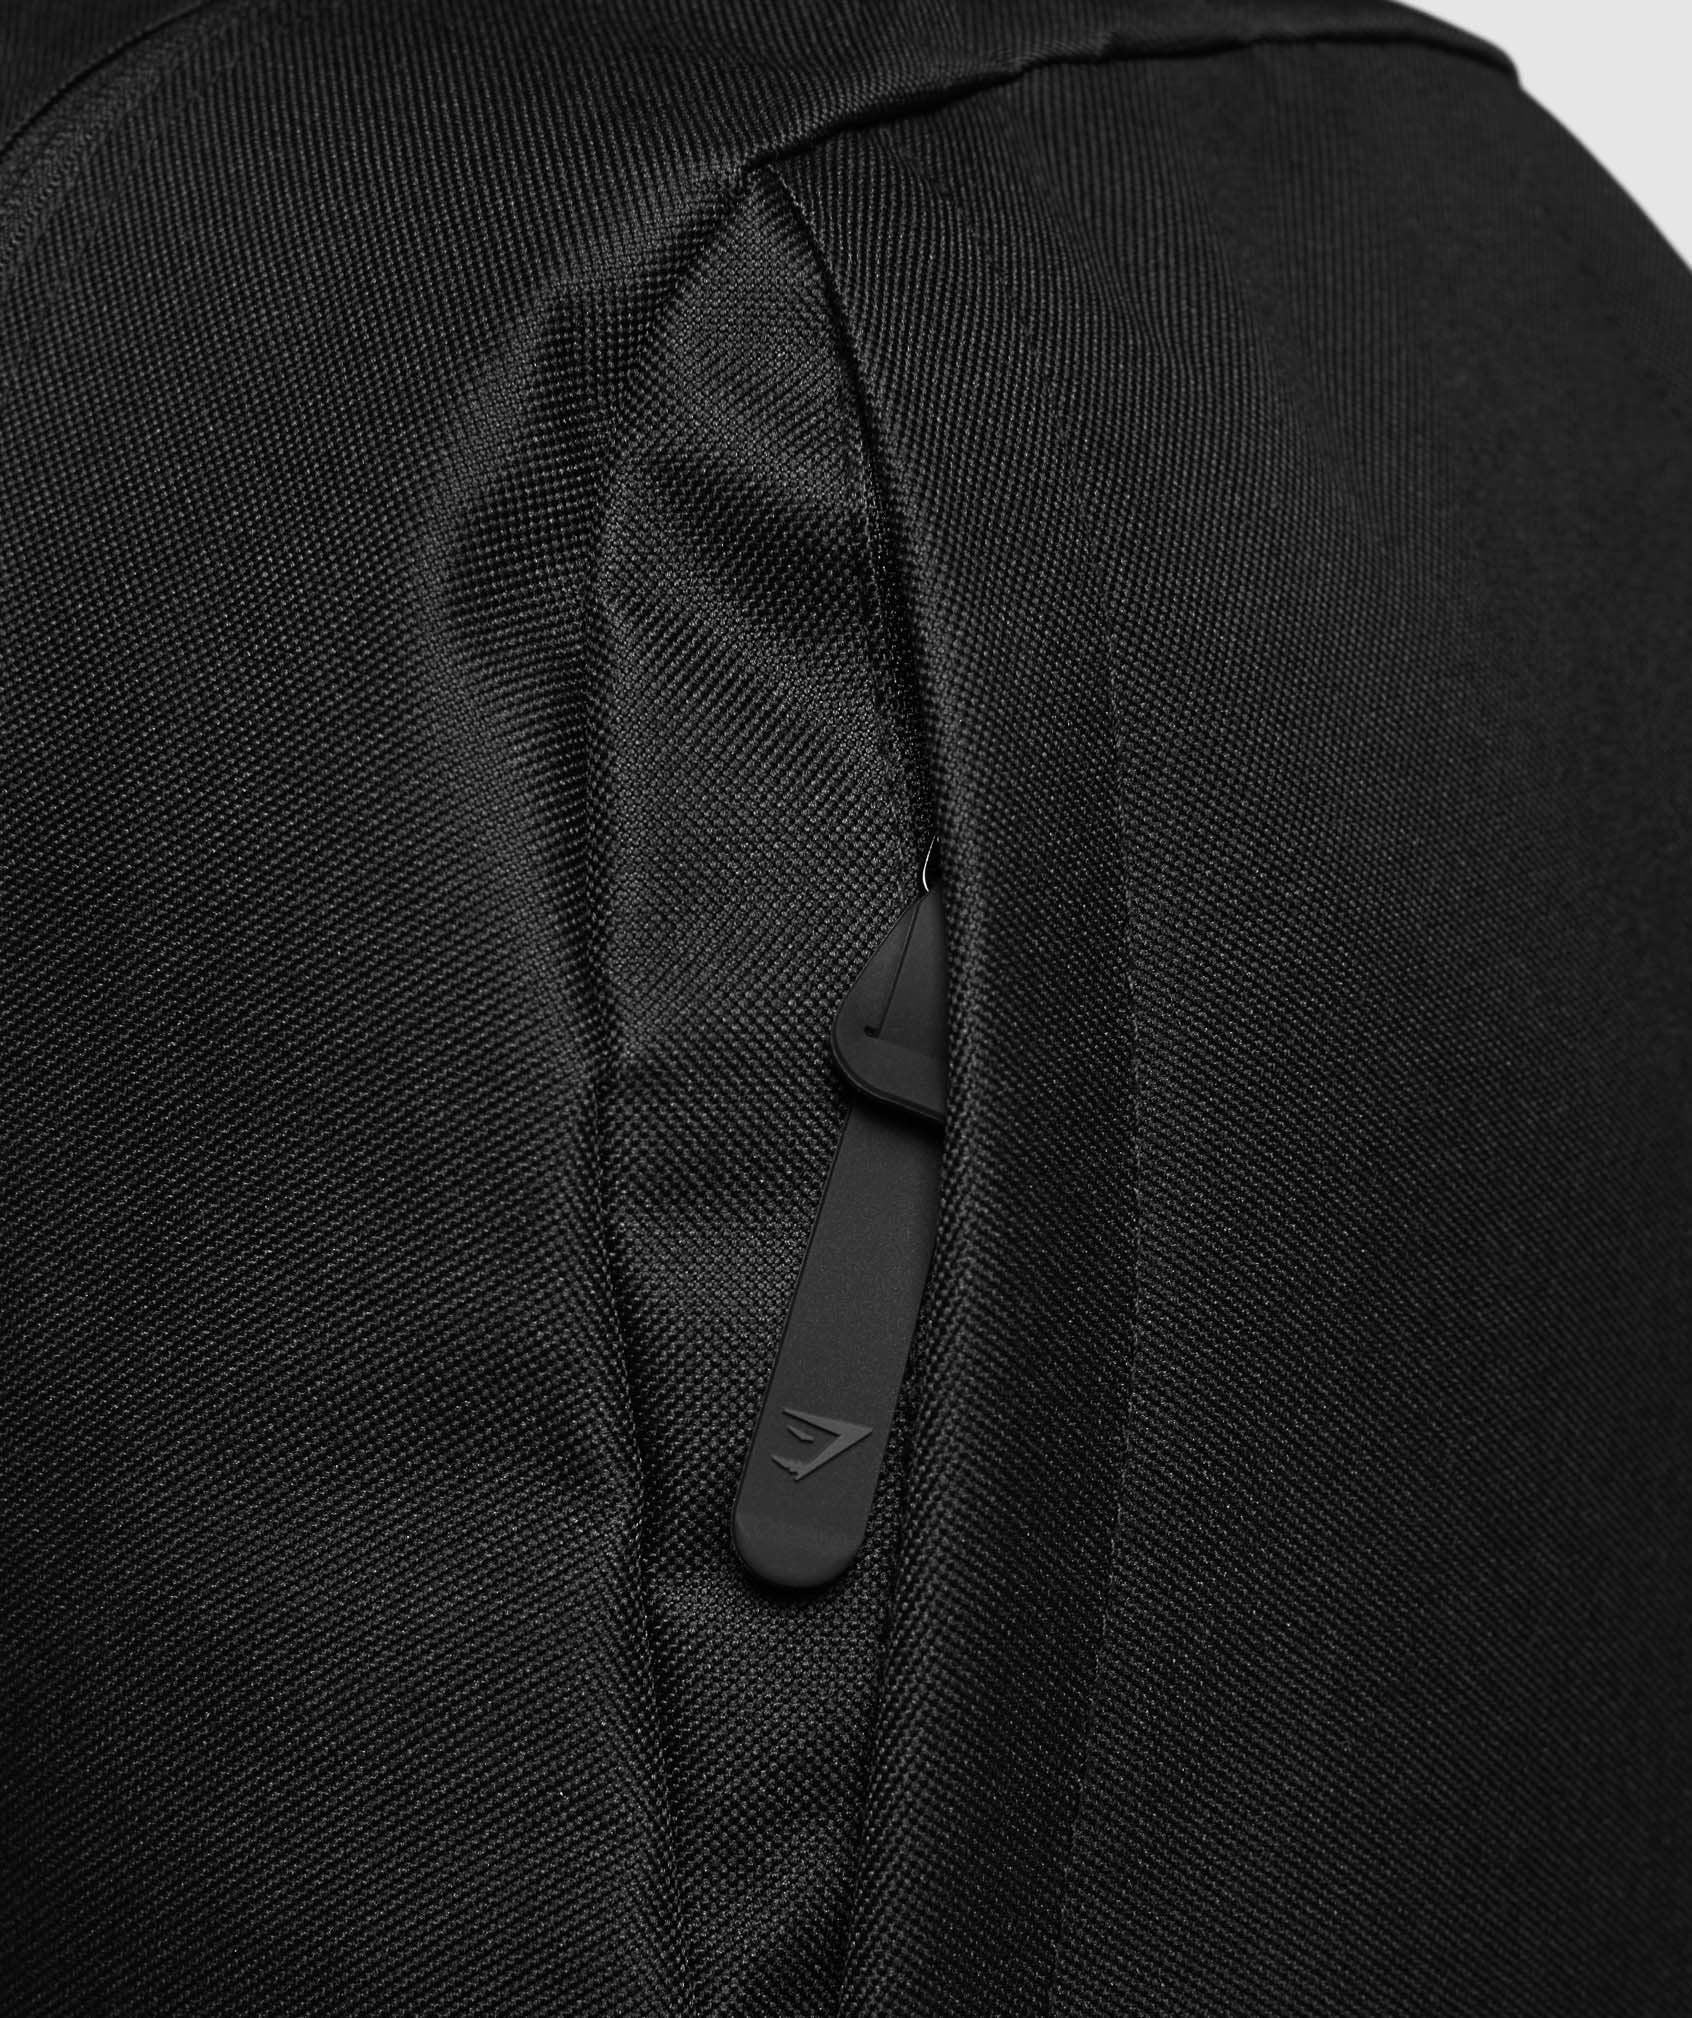 Academy Backpack in Black - view 6